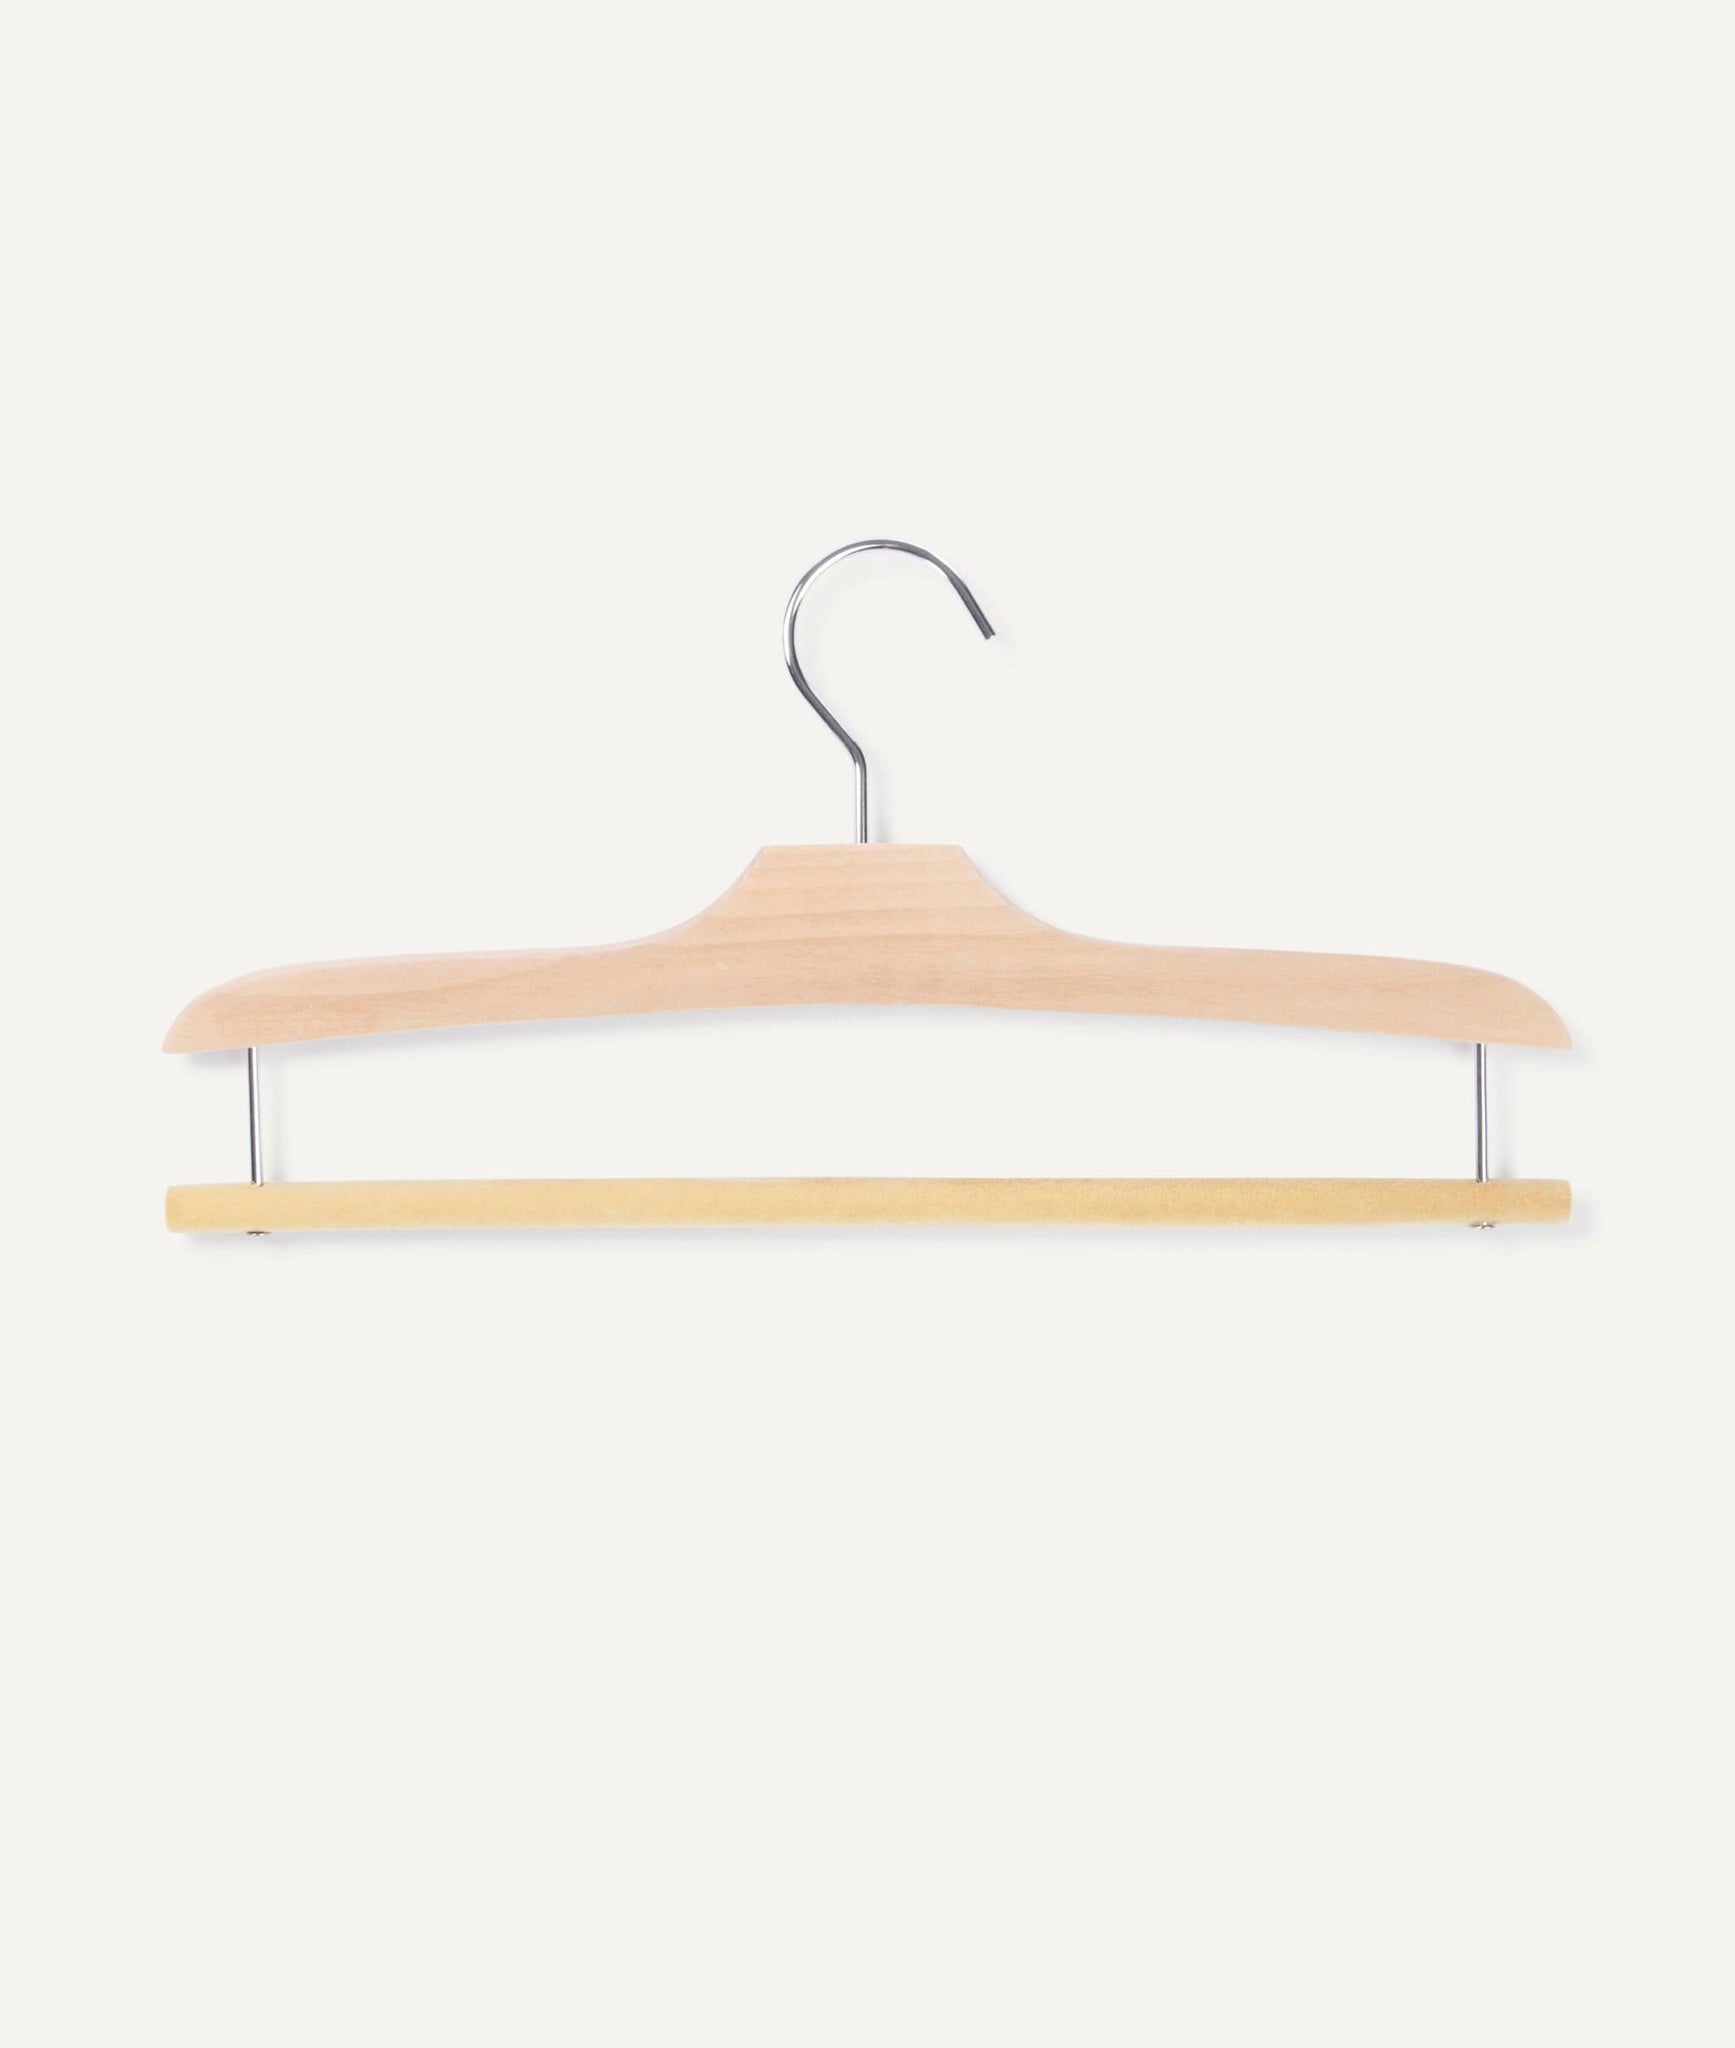 Clothes Hanger with Bar in Wood and Nickel - 5 pz.